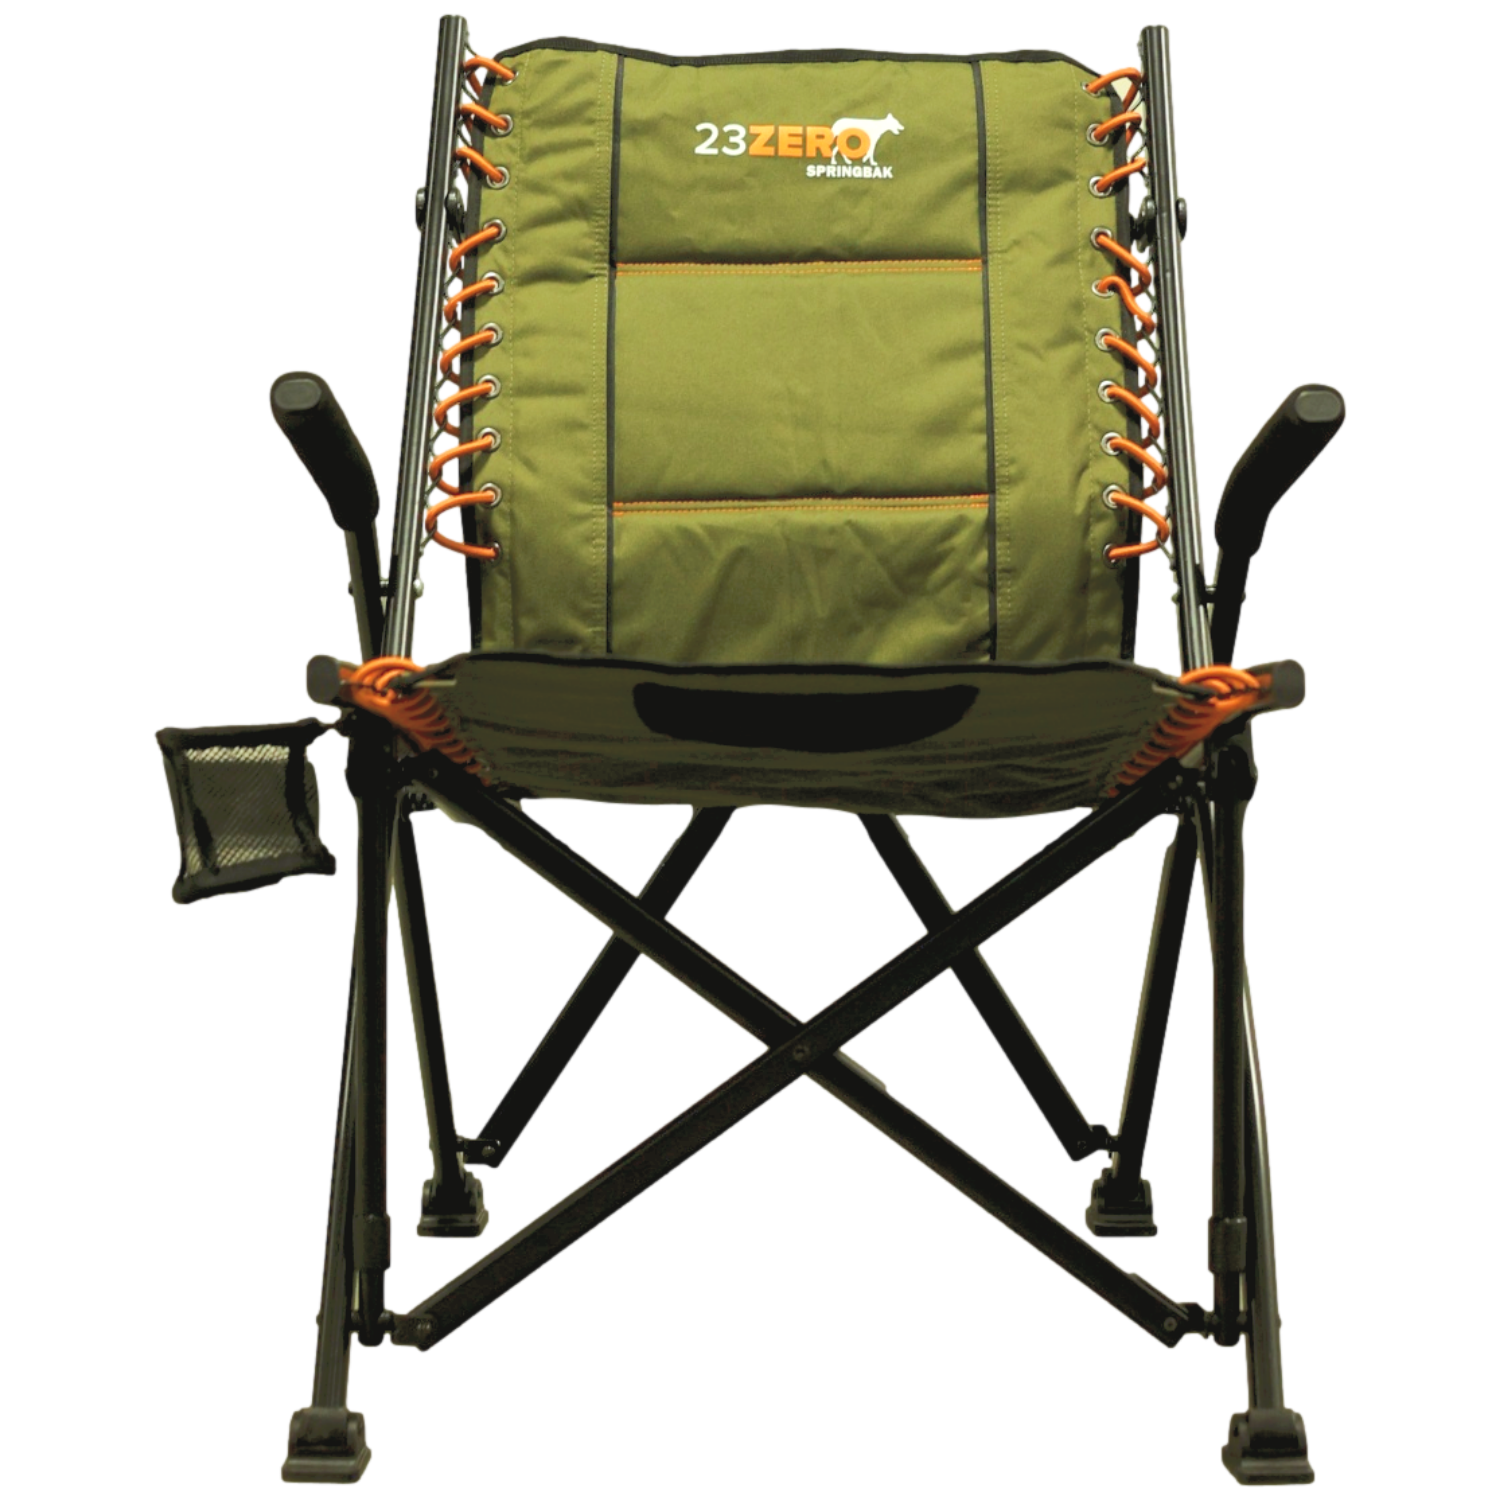 Gear Update - 3+ Years with the Sunyear Camp Chair 